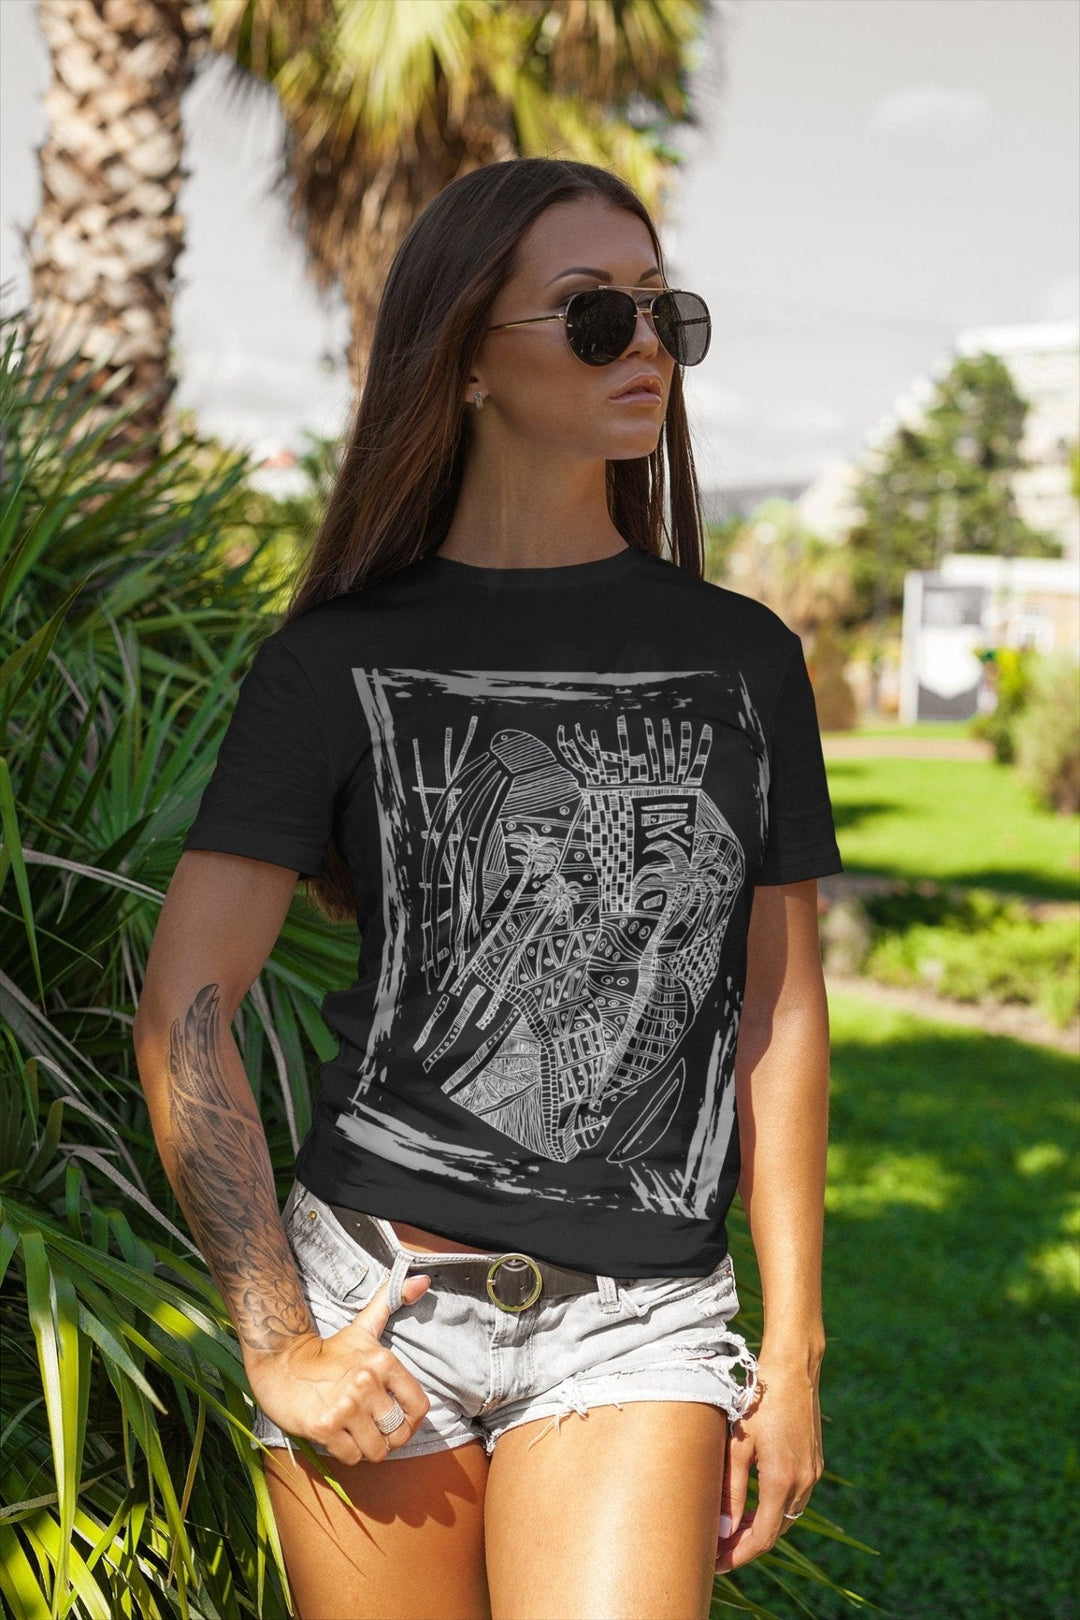 Abstract T-Shirt - Islandlife Torn - Abstract T-Shirt Exclusively From Miami Abstract at Miami Abstract Inc.